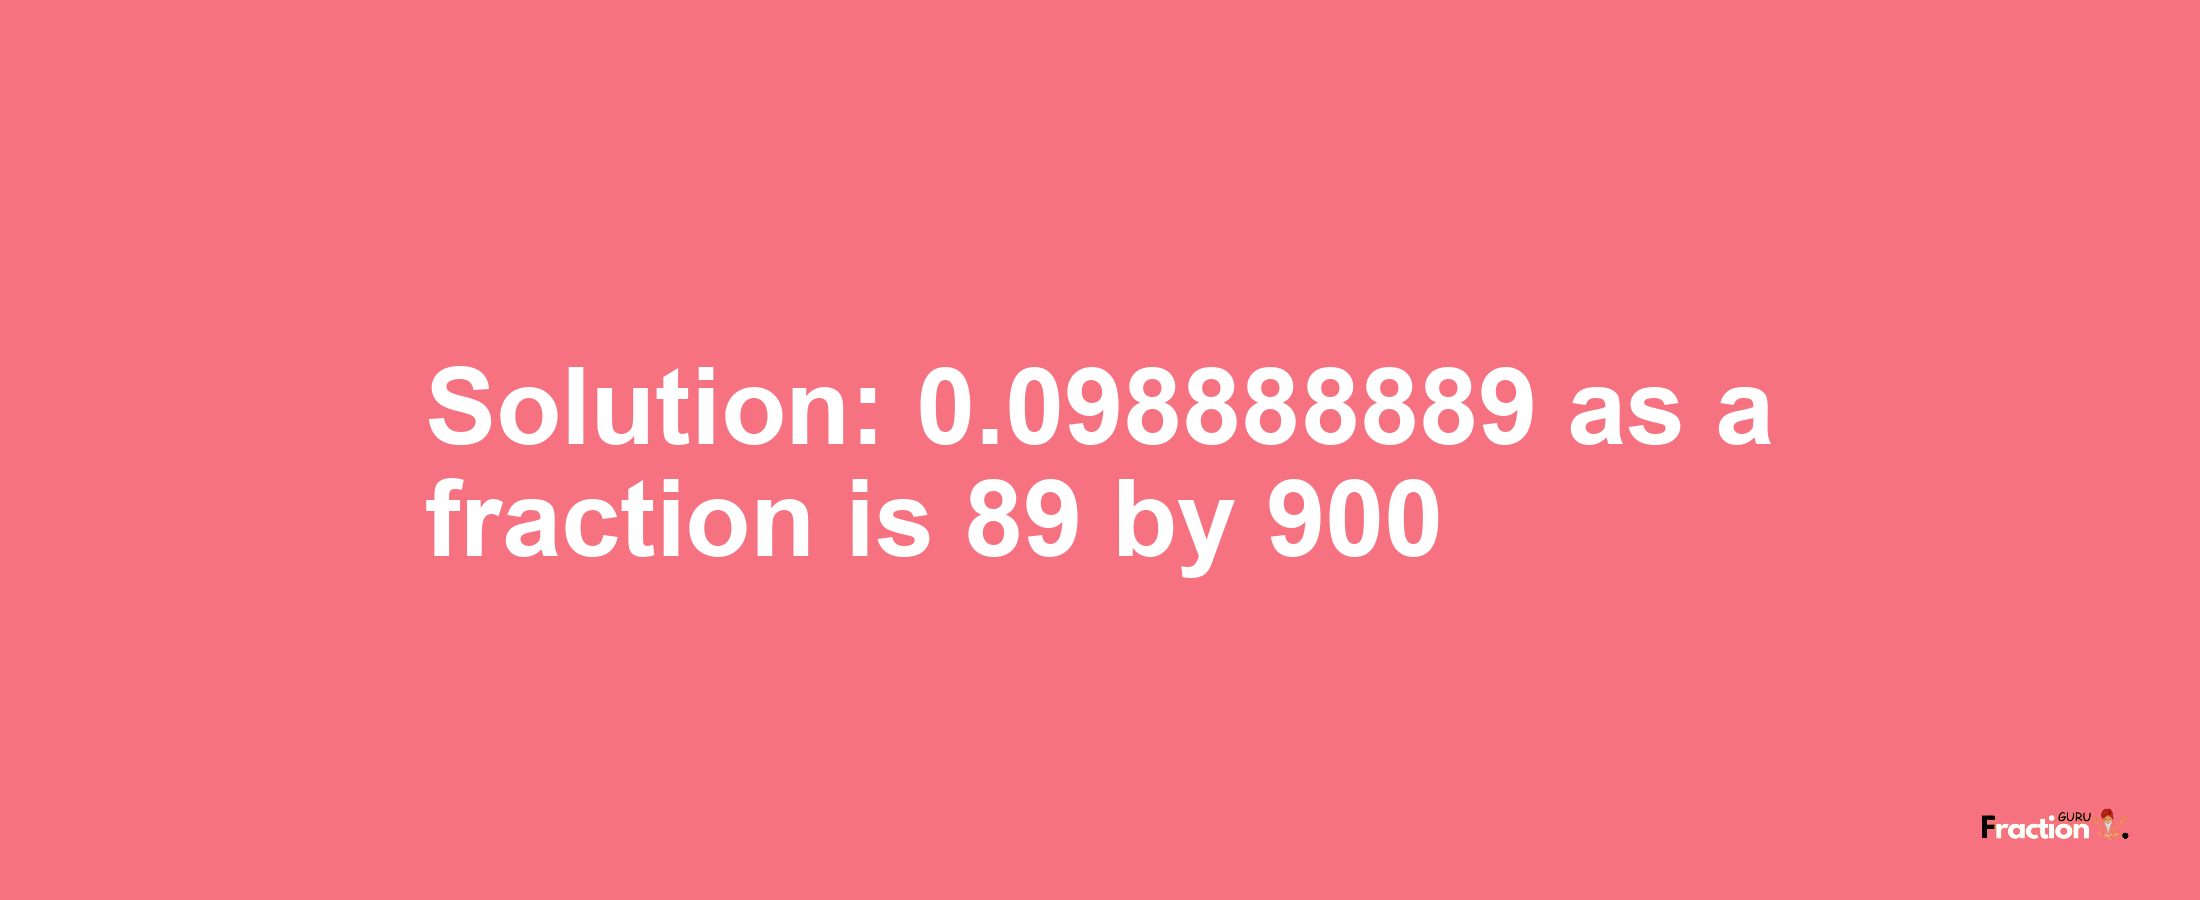 Solution:0.098888889 as a fraction is 89/900